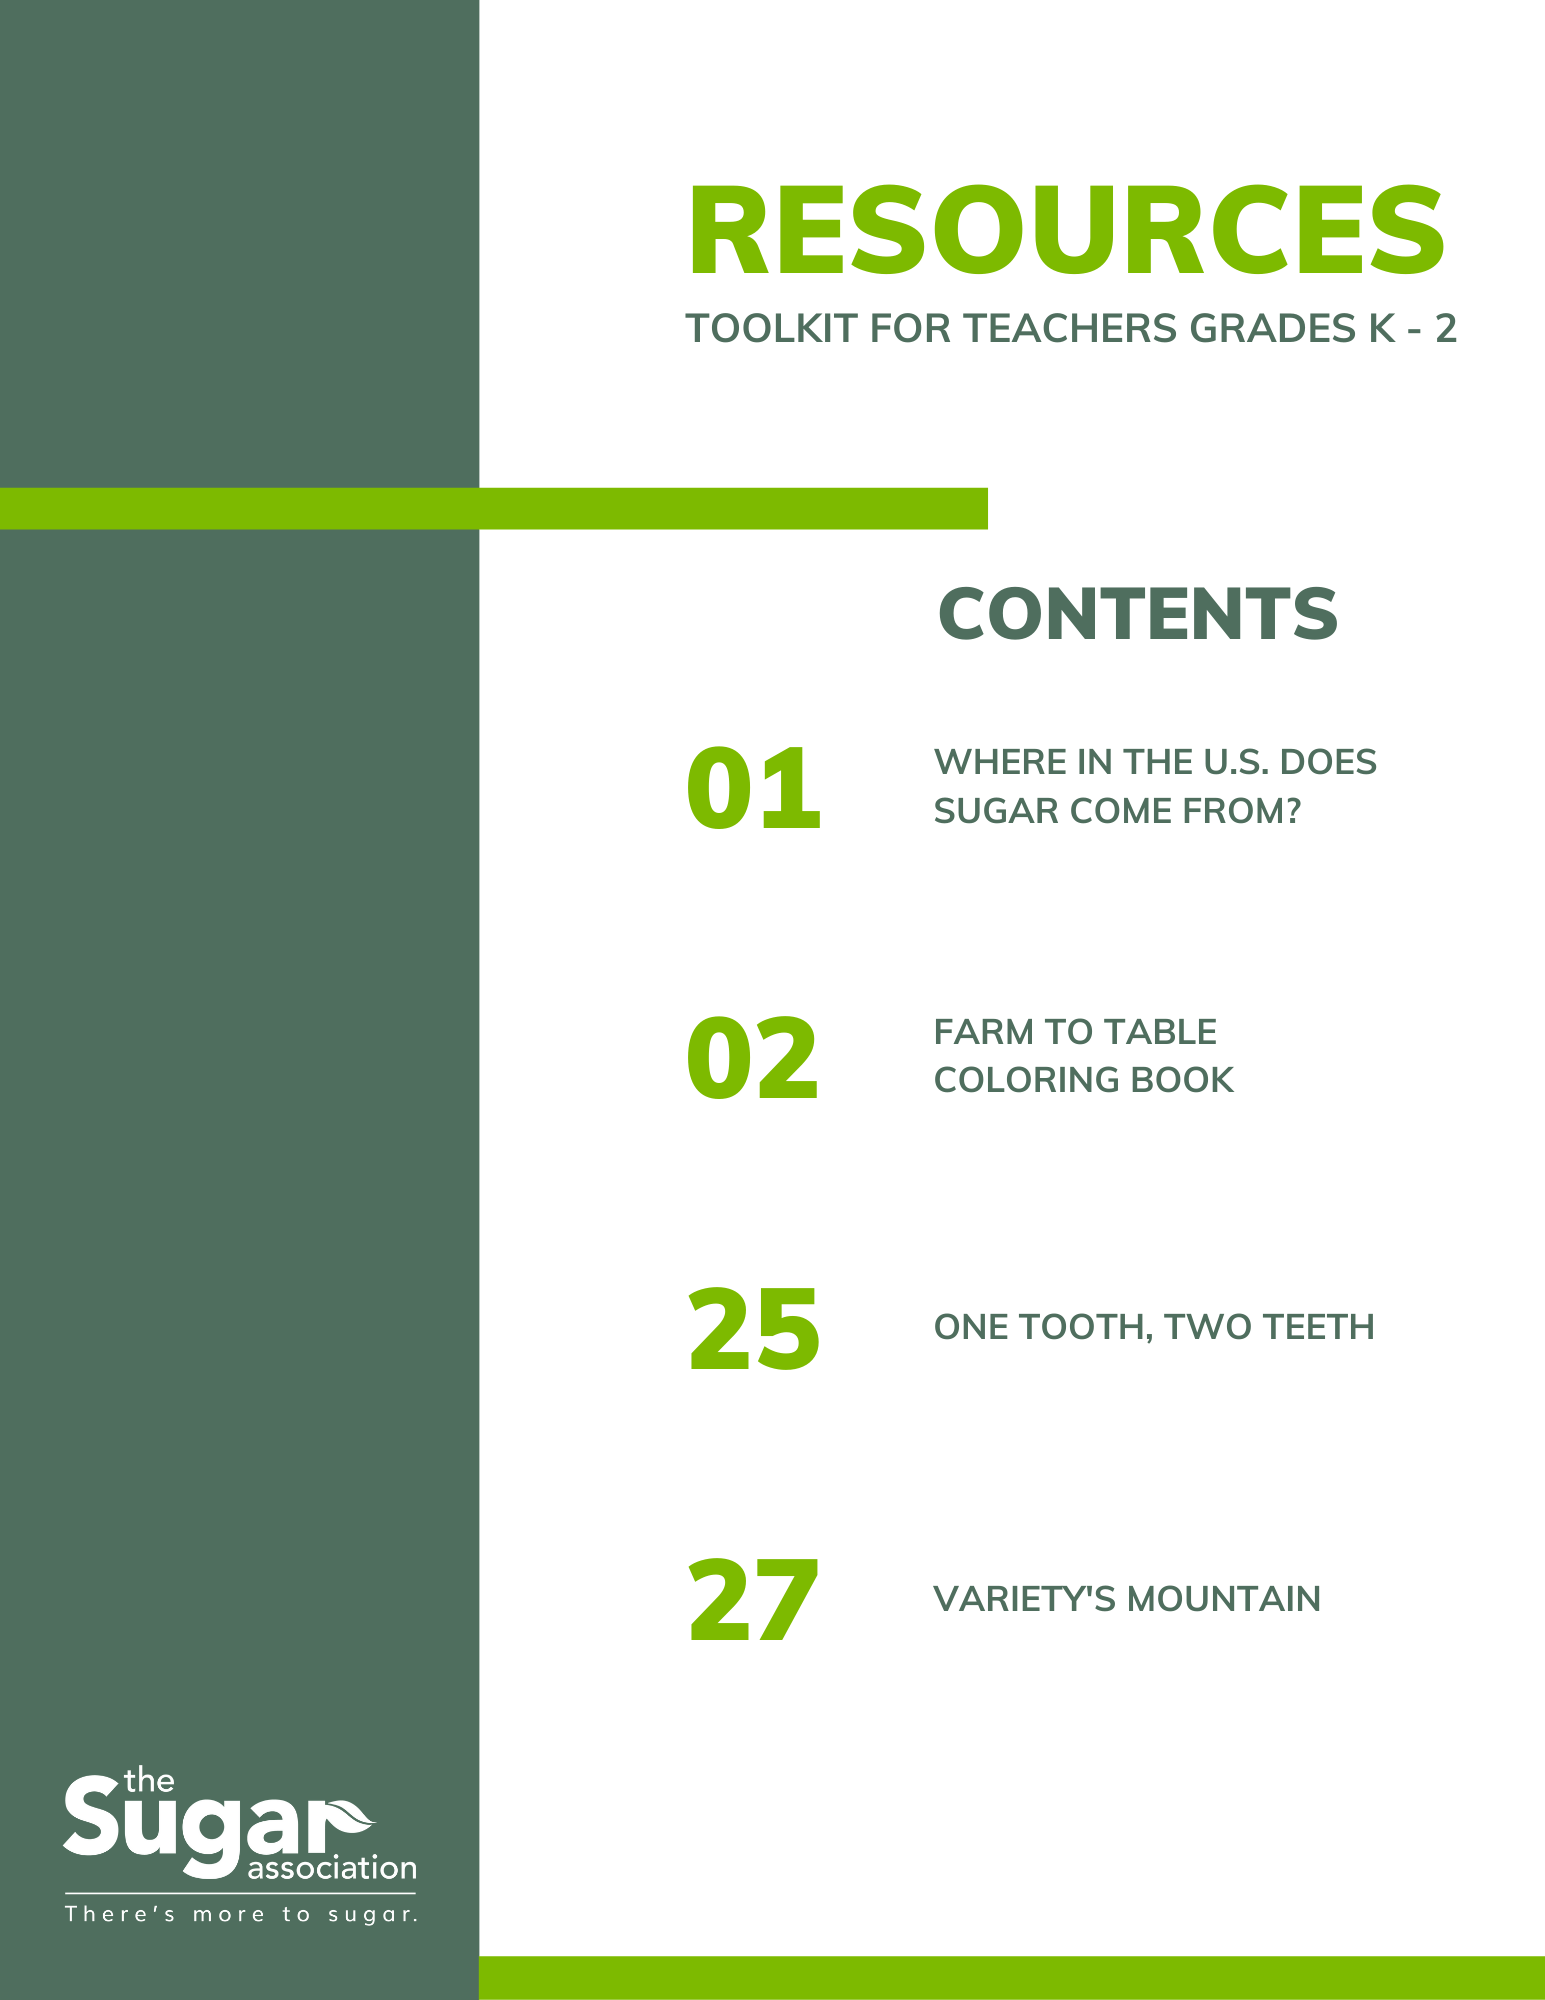 Resource Toolkit for Grades K-2